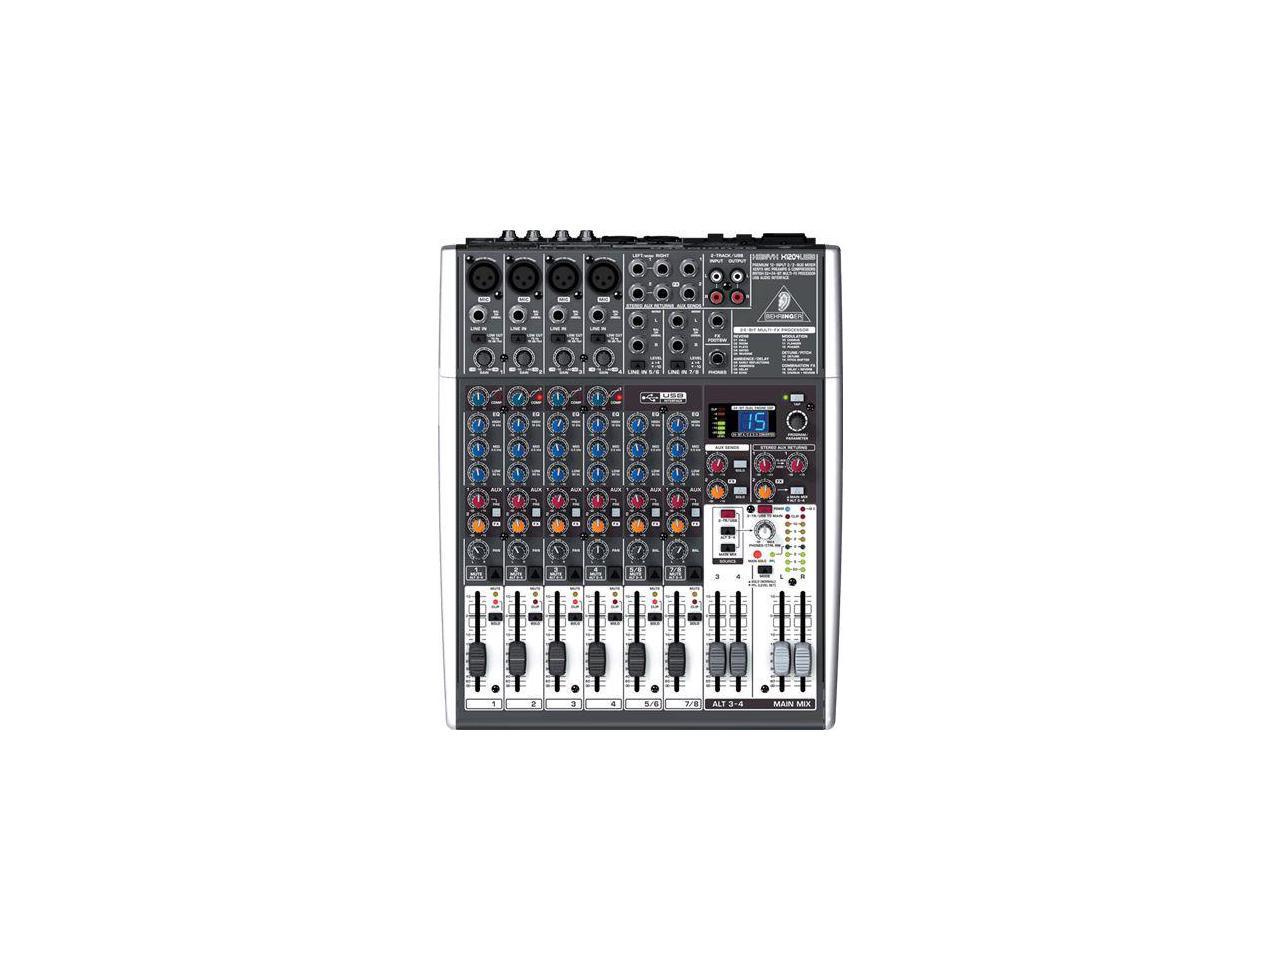 behringer xenyx x1204usb overview